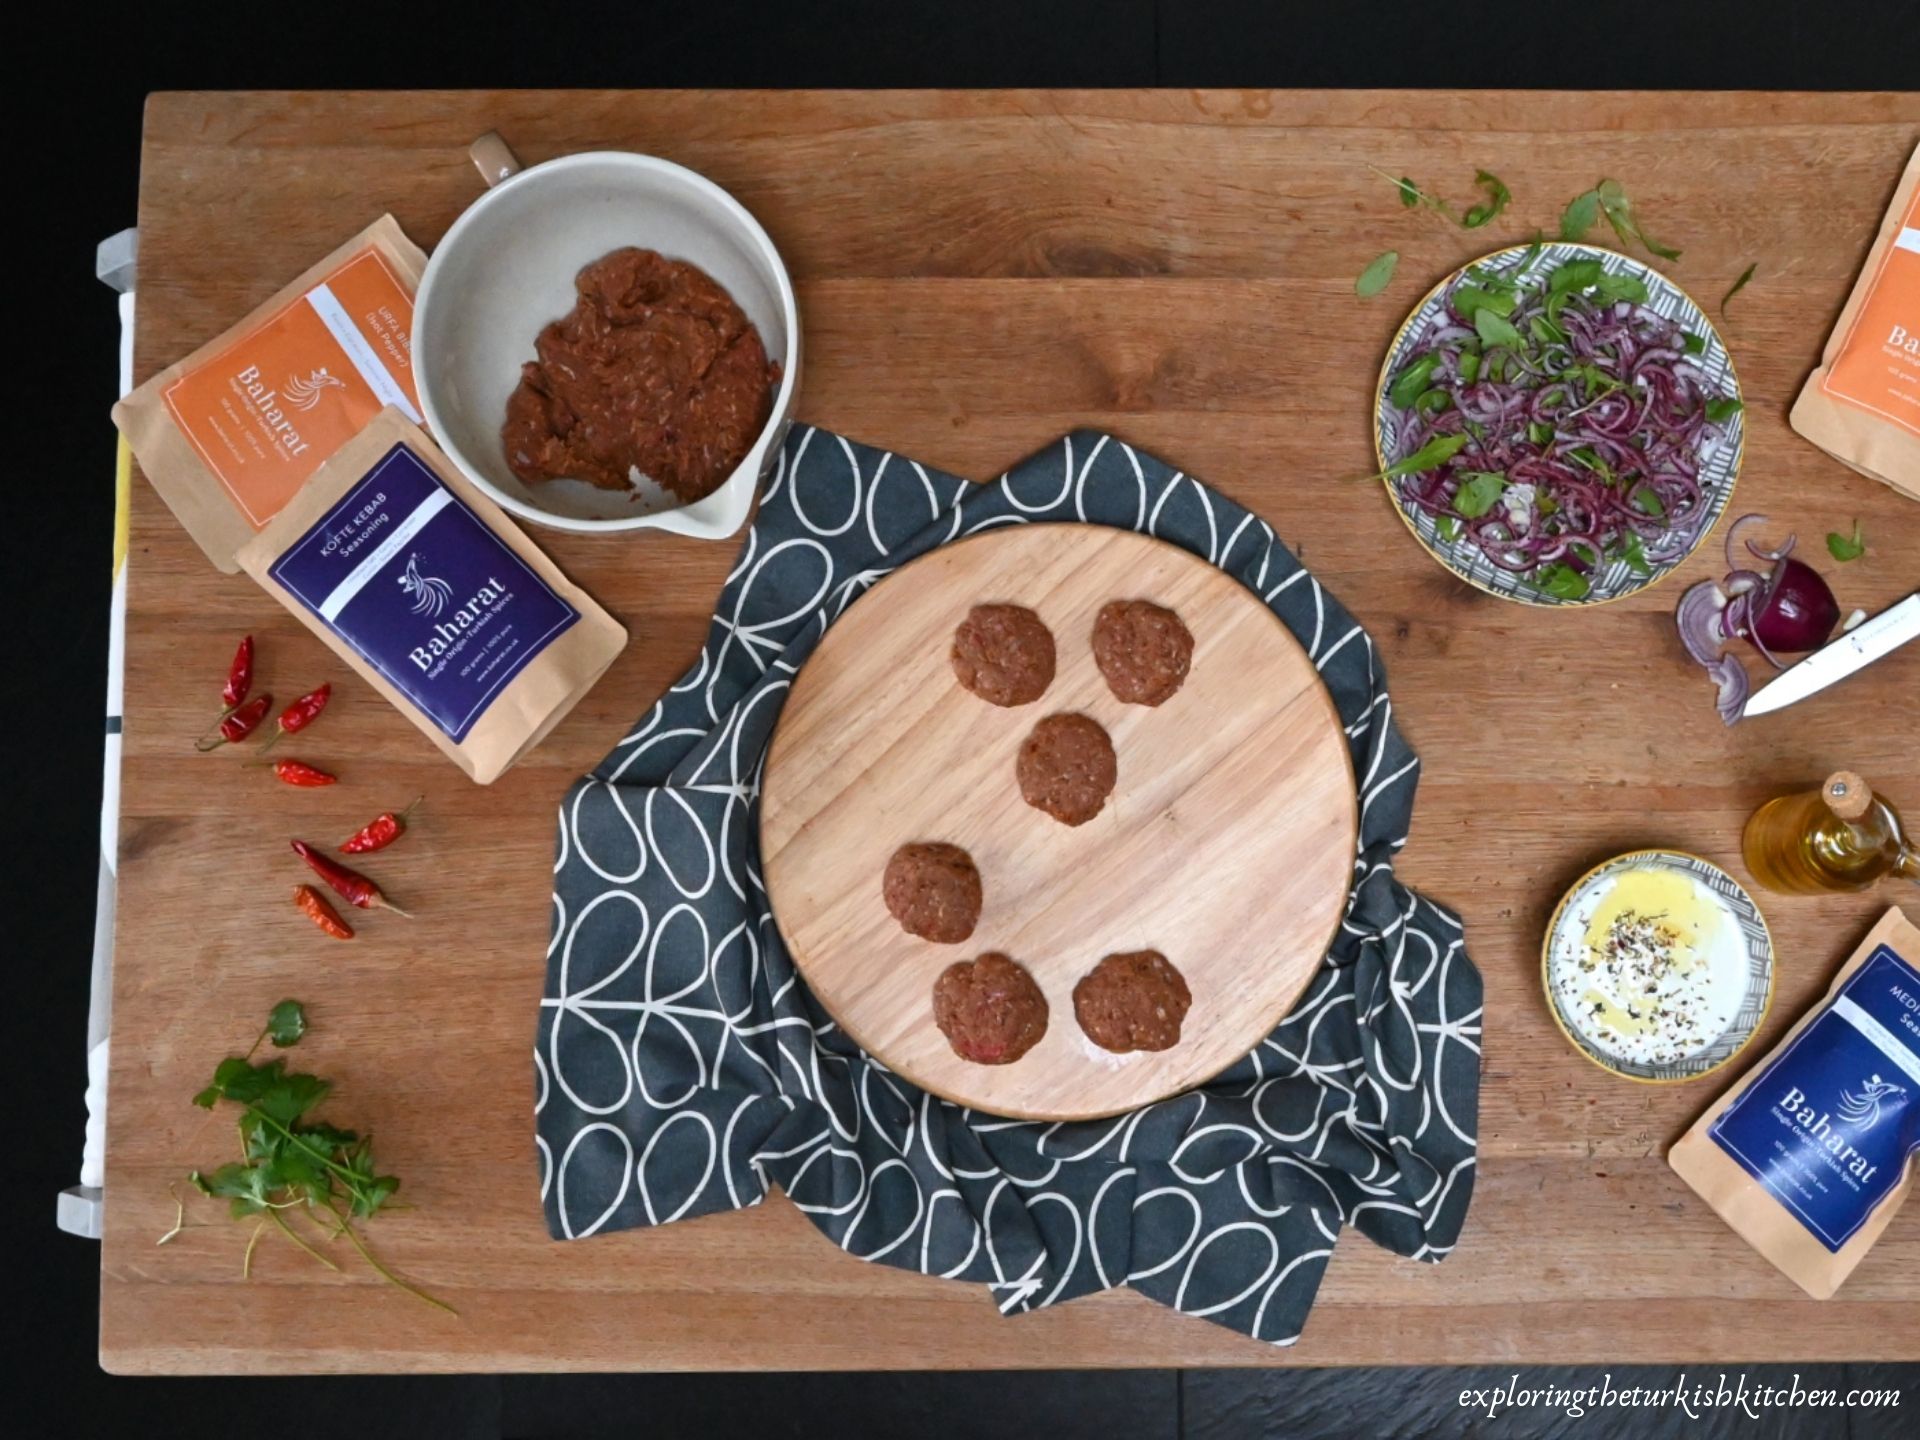 A large butchers block. Scene shows making Turkish meatballs. Packets of Baharat brand spices mixes, olive oil, chillies and yoghurt surround some made meatballs and unmade mixture